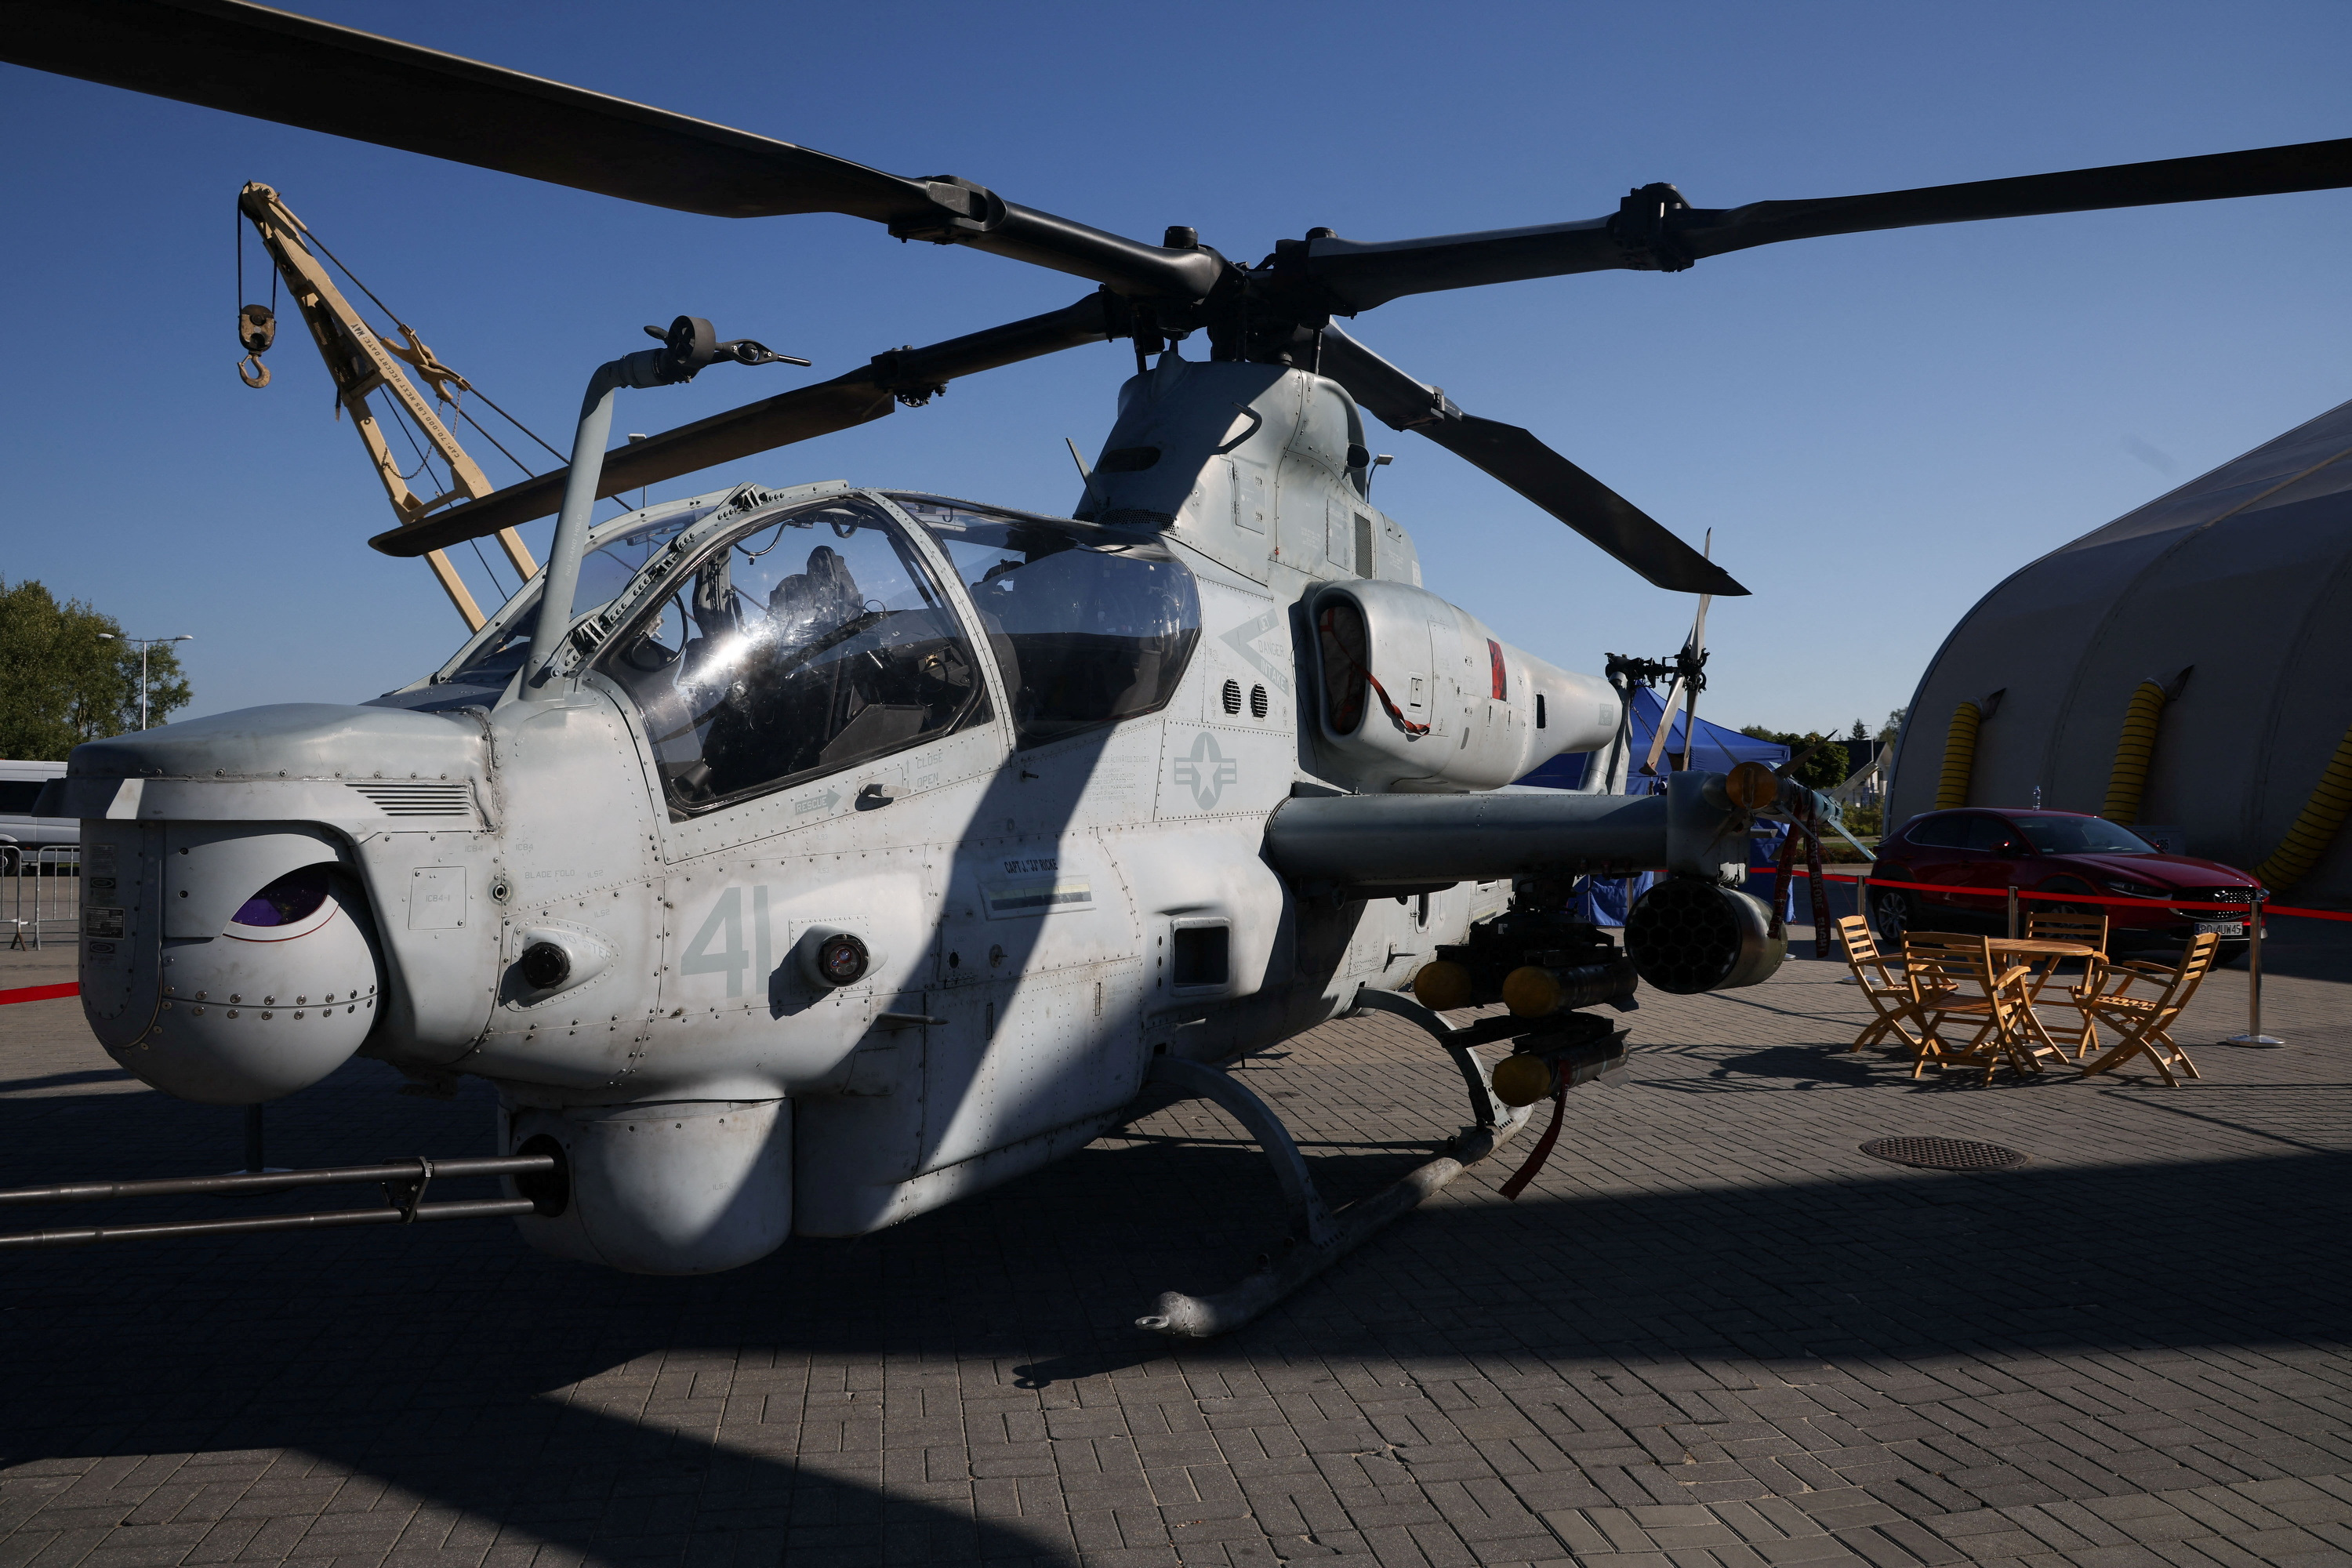 A Bell helicopter Ah-1Z Viper helicopter is seen outside a hall at the 30th International Defence Industry Exhibition in Kielce